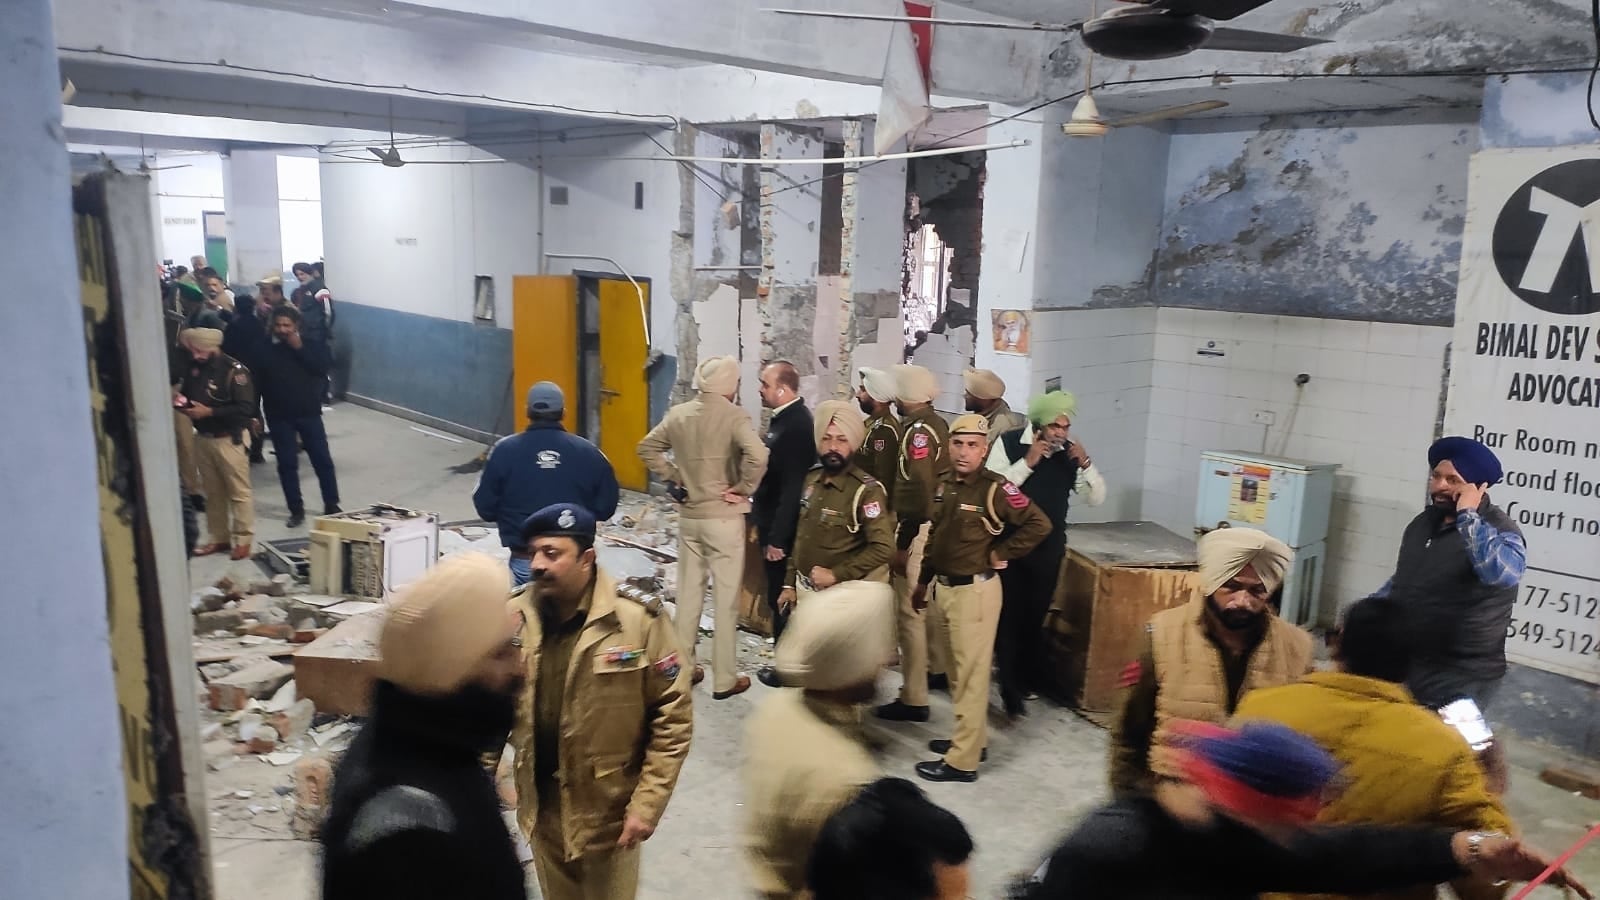 Explosion inside Ludhiana district court complex; 1 dead, 5 injured | Latest News India - Hindustan Times